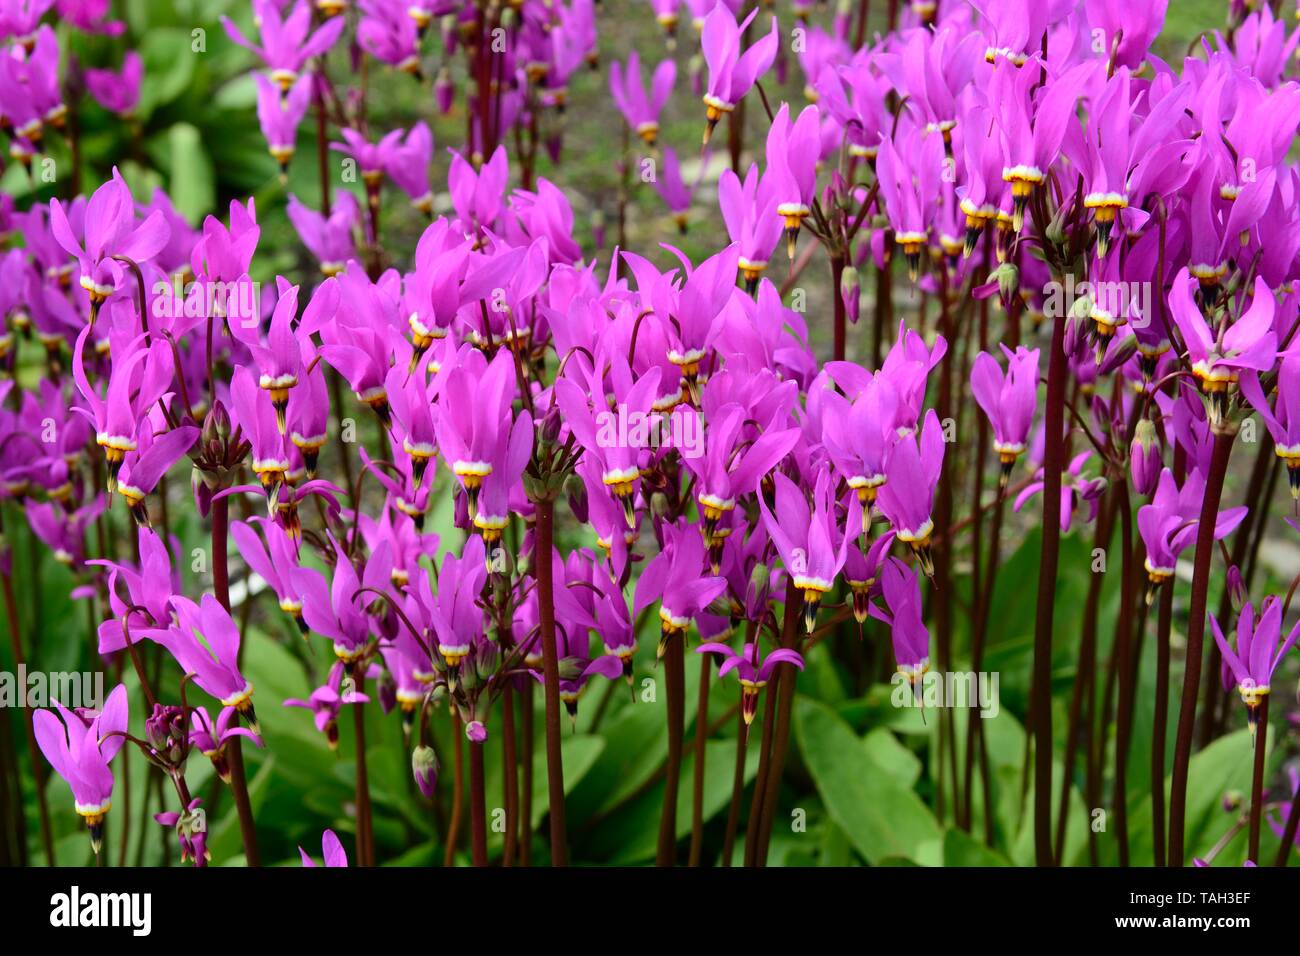 Shooting Star Flowers High Resolution Stock Photography And Images Alamy